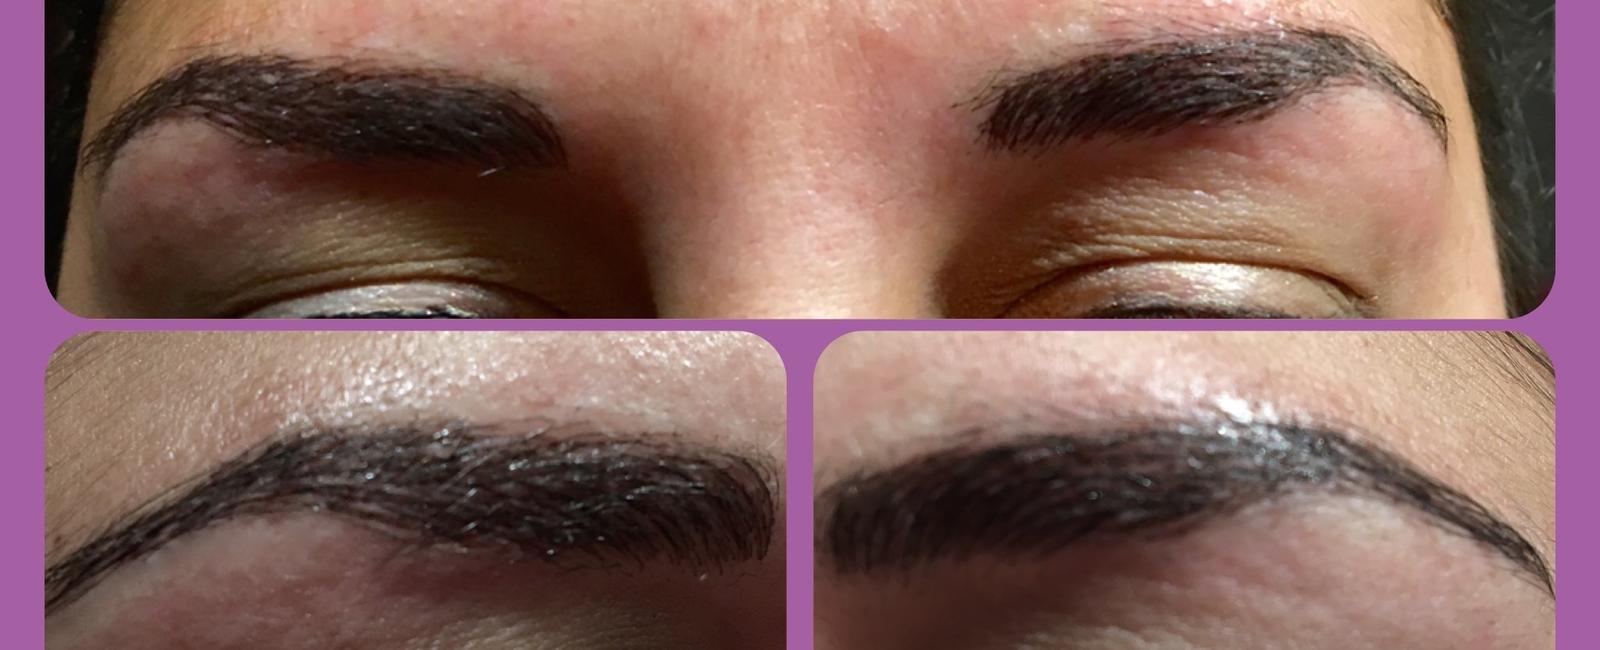 Eyebrow hair lasts for about 3 5 months before it sheds and new hair grows in its place